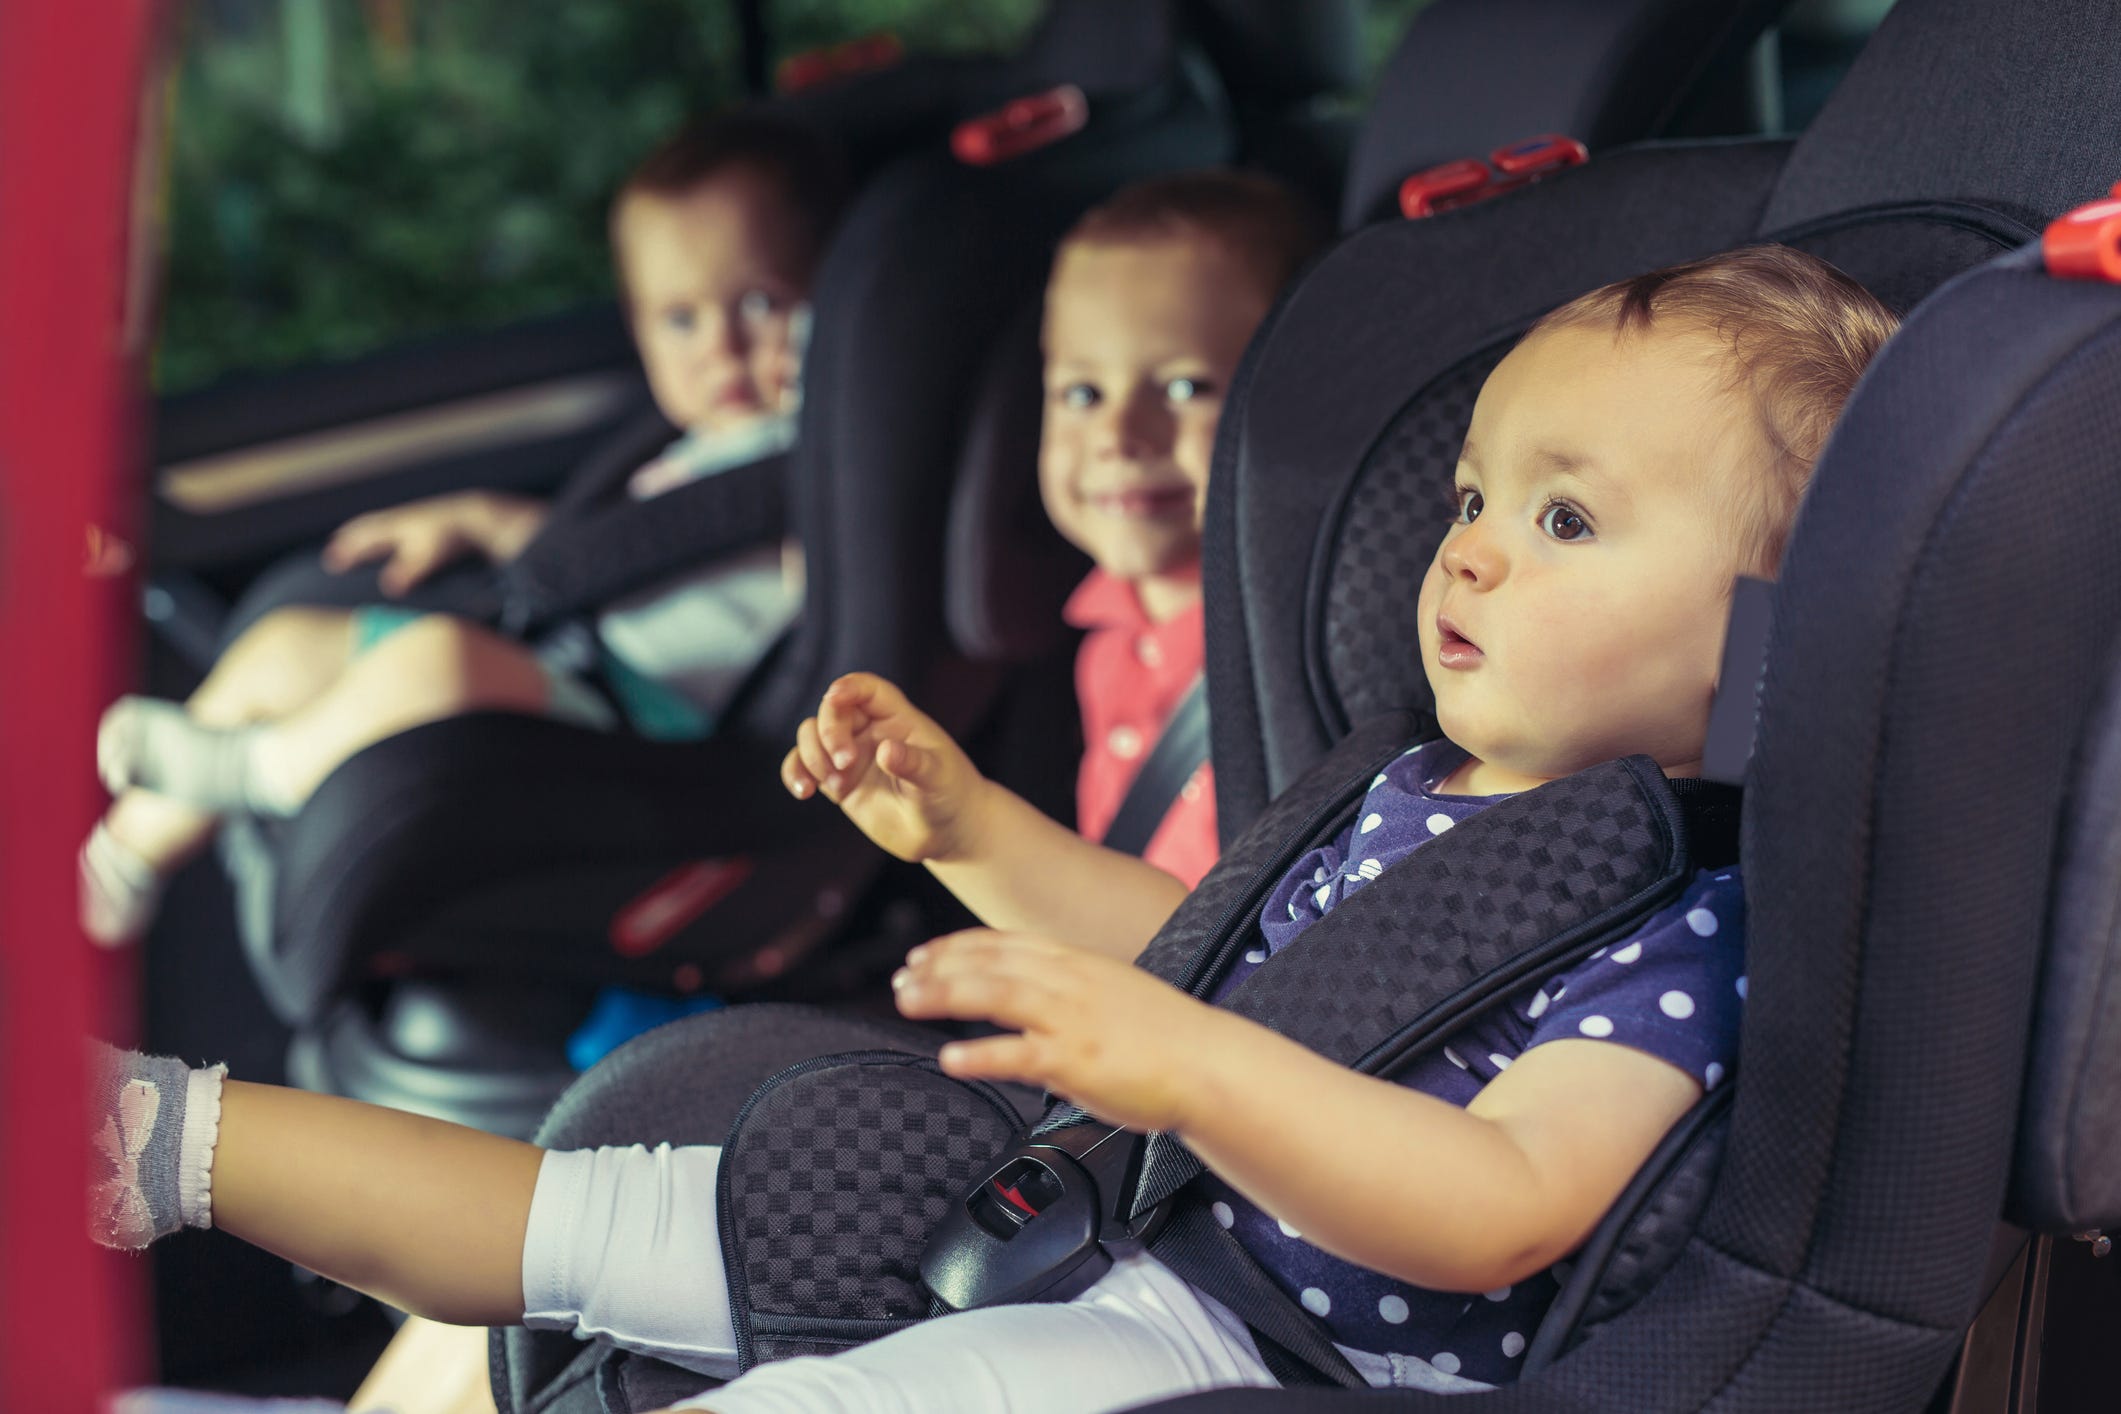 Get a $30 gift card for recycling baby seat